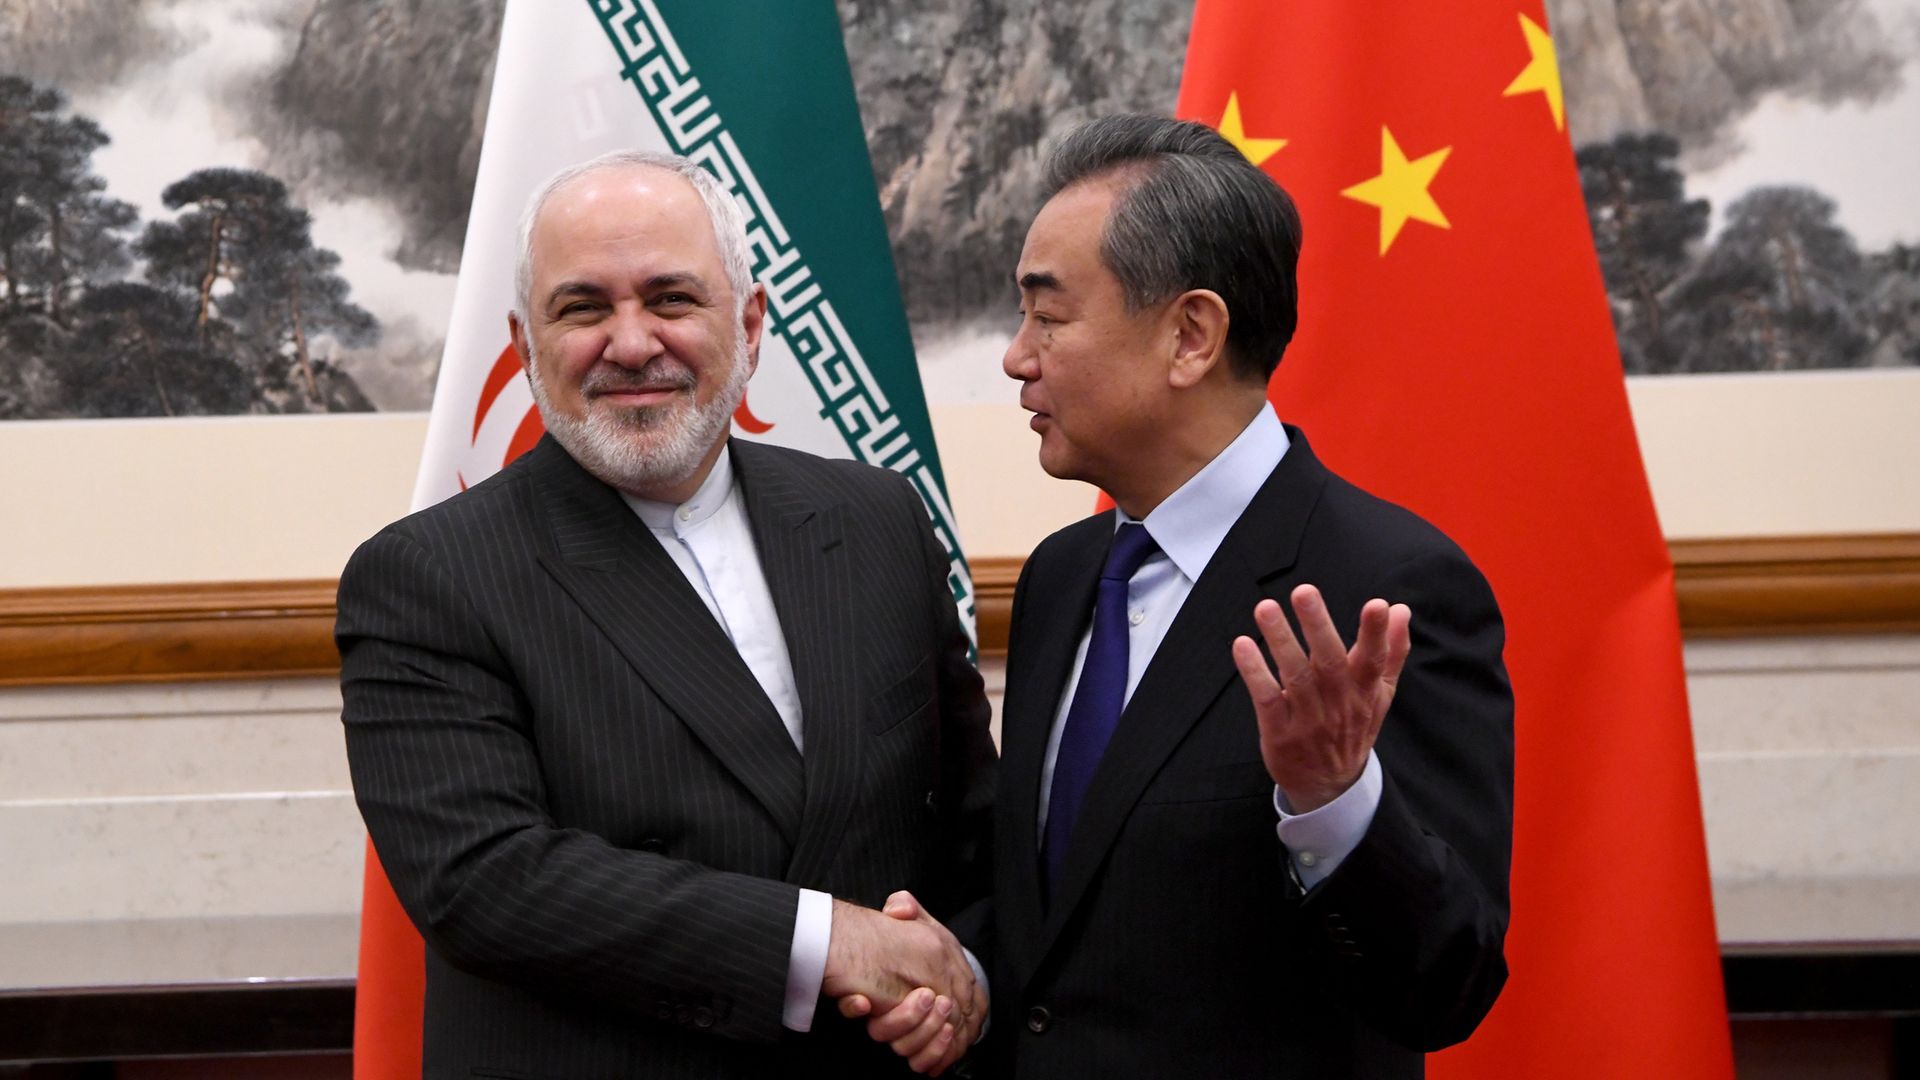 China's Foreign Minister Wang Yi shakes hands with Iran's Foreign Minister Mohammad Javad Zarif during a meeting at the Diaoyutai state guest house. - Credit: Getty Images